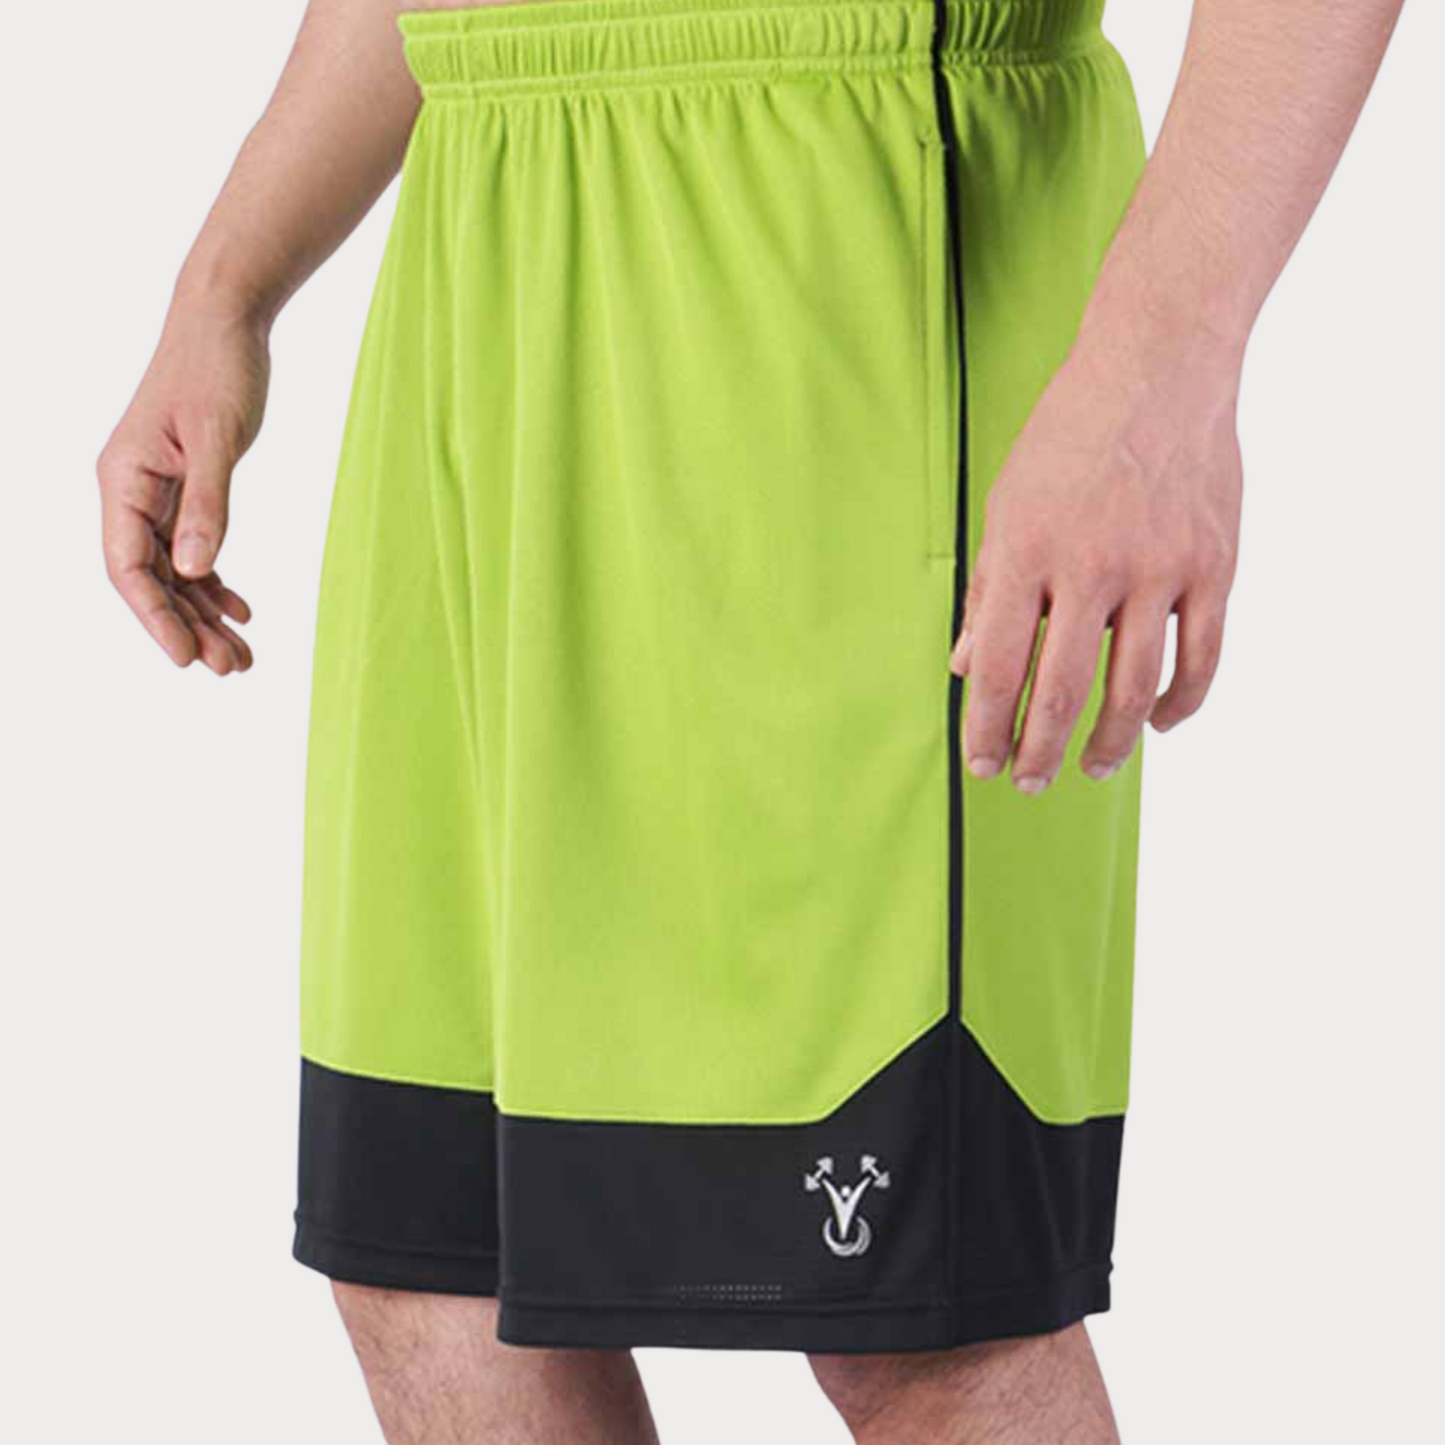 Shorts Activewear / Sportswear - Men's Classic Textured Loose Fit Shorts - S / Irish Green - Outperformer